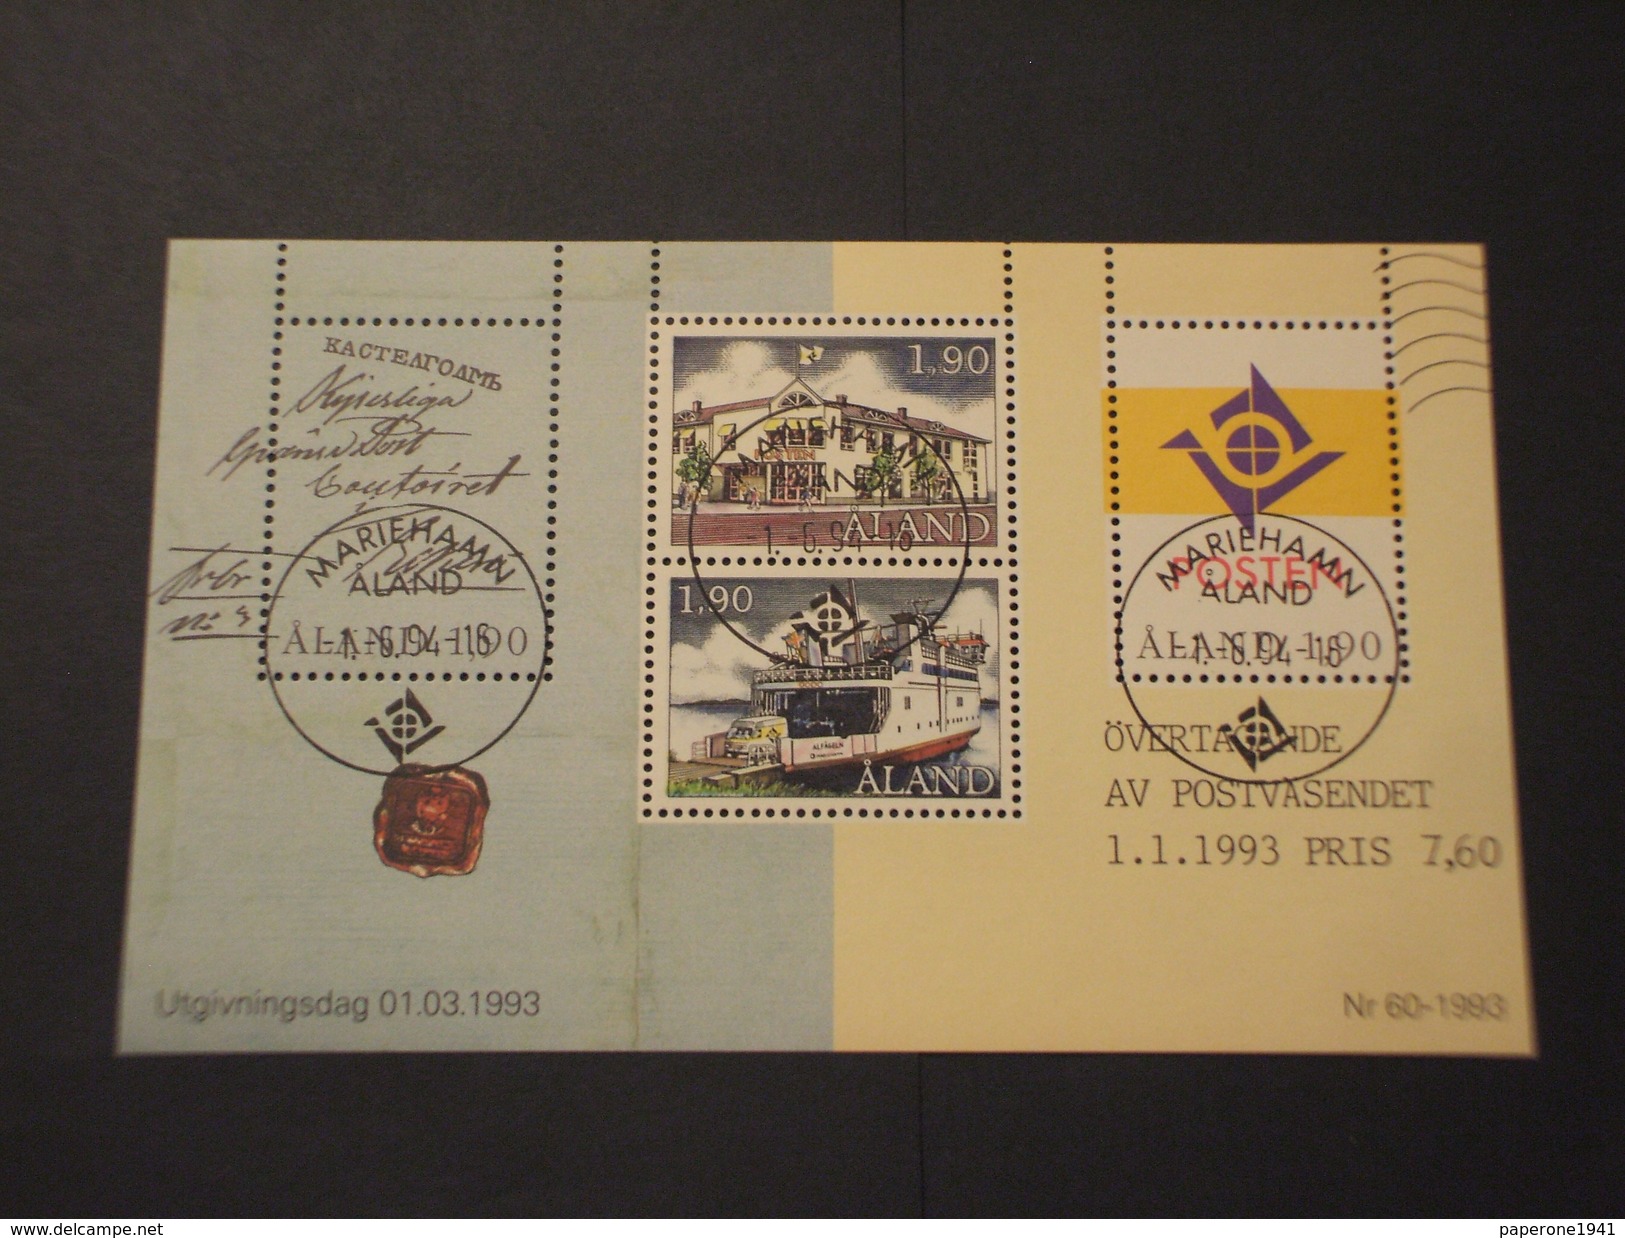 ALAND - BF 1993 POSTA - TIMBRATO/USED - Local Post Stamps